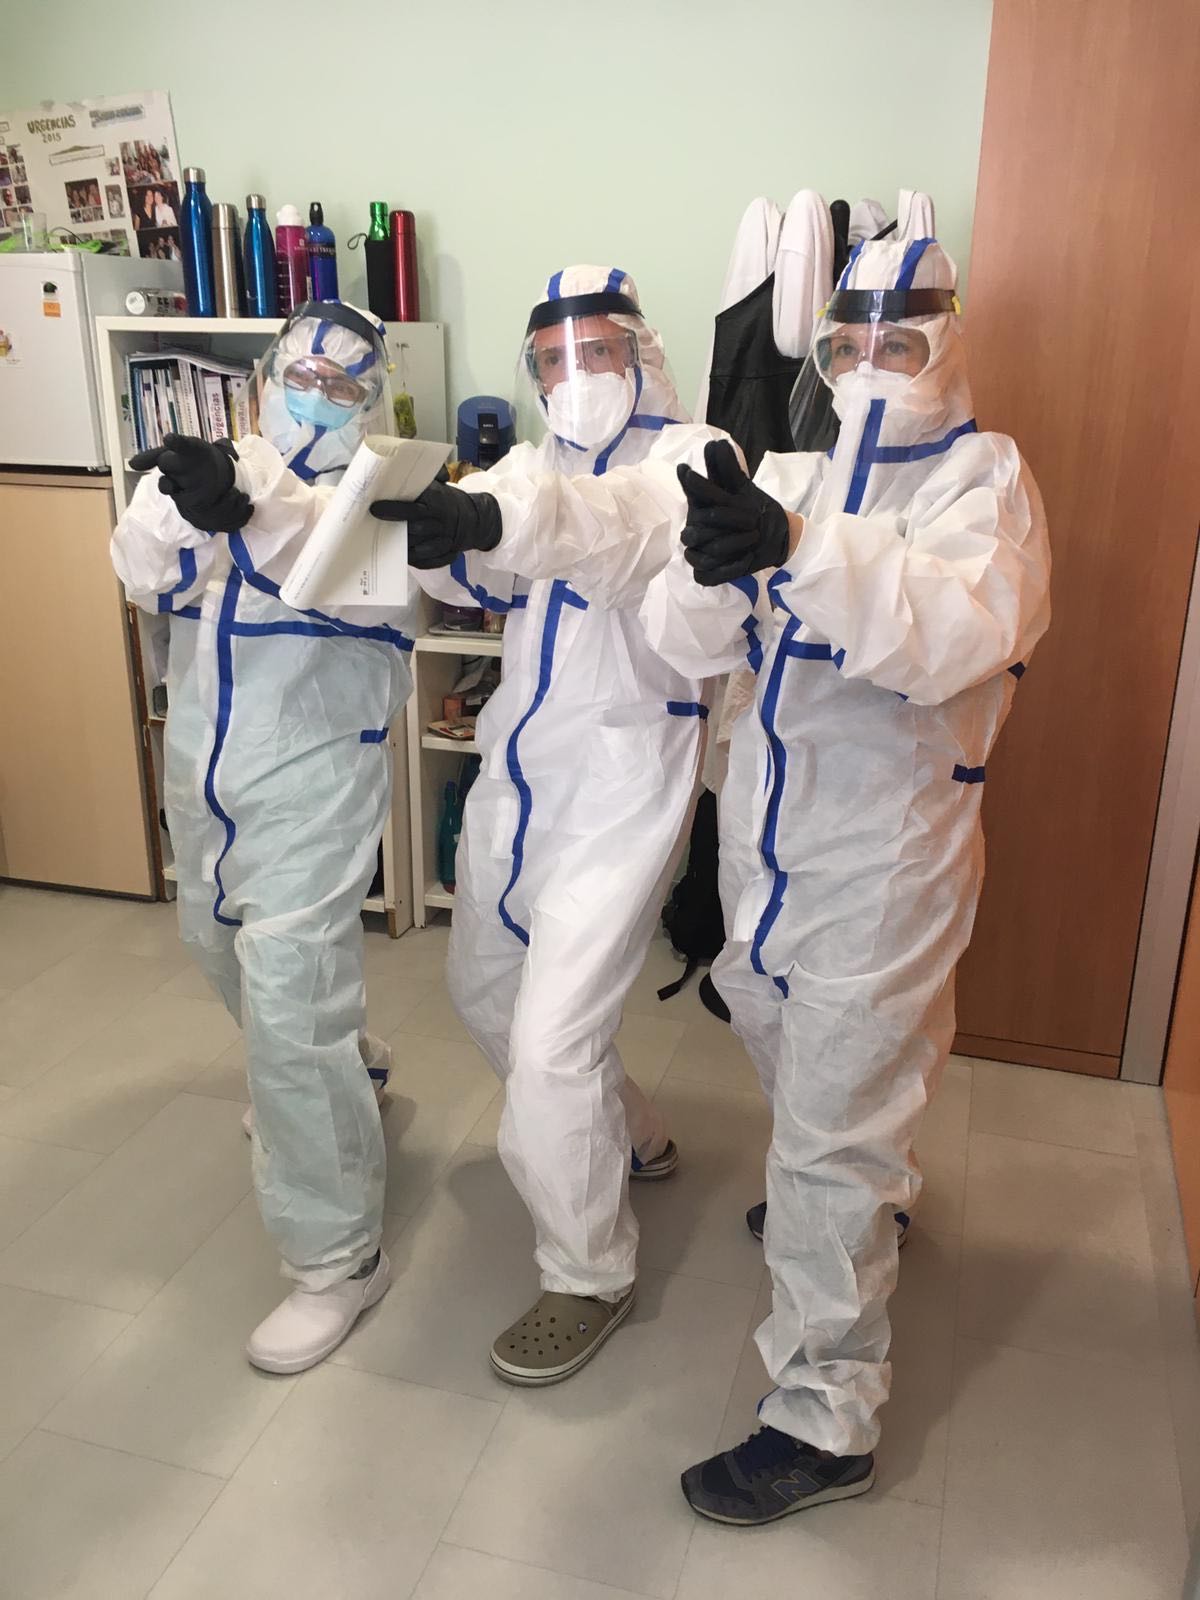 Health workers at Sara's Madrid hospital use improvised masks made of plastic screens, donated by volunteers, to protect themselves from the virus that causes COVID-19.